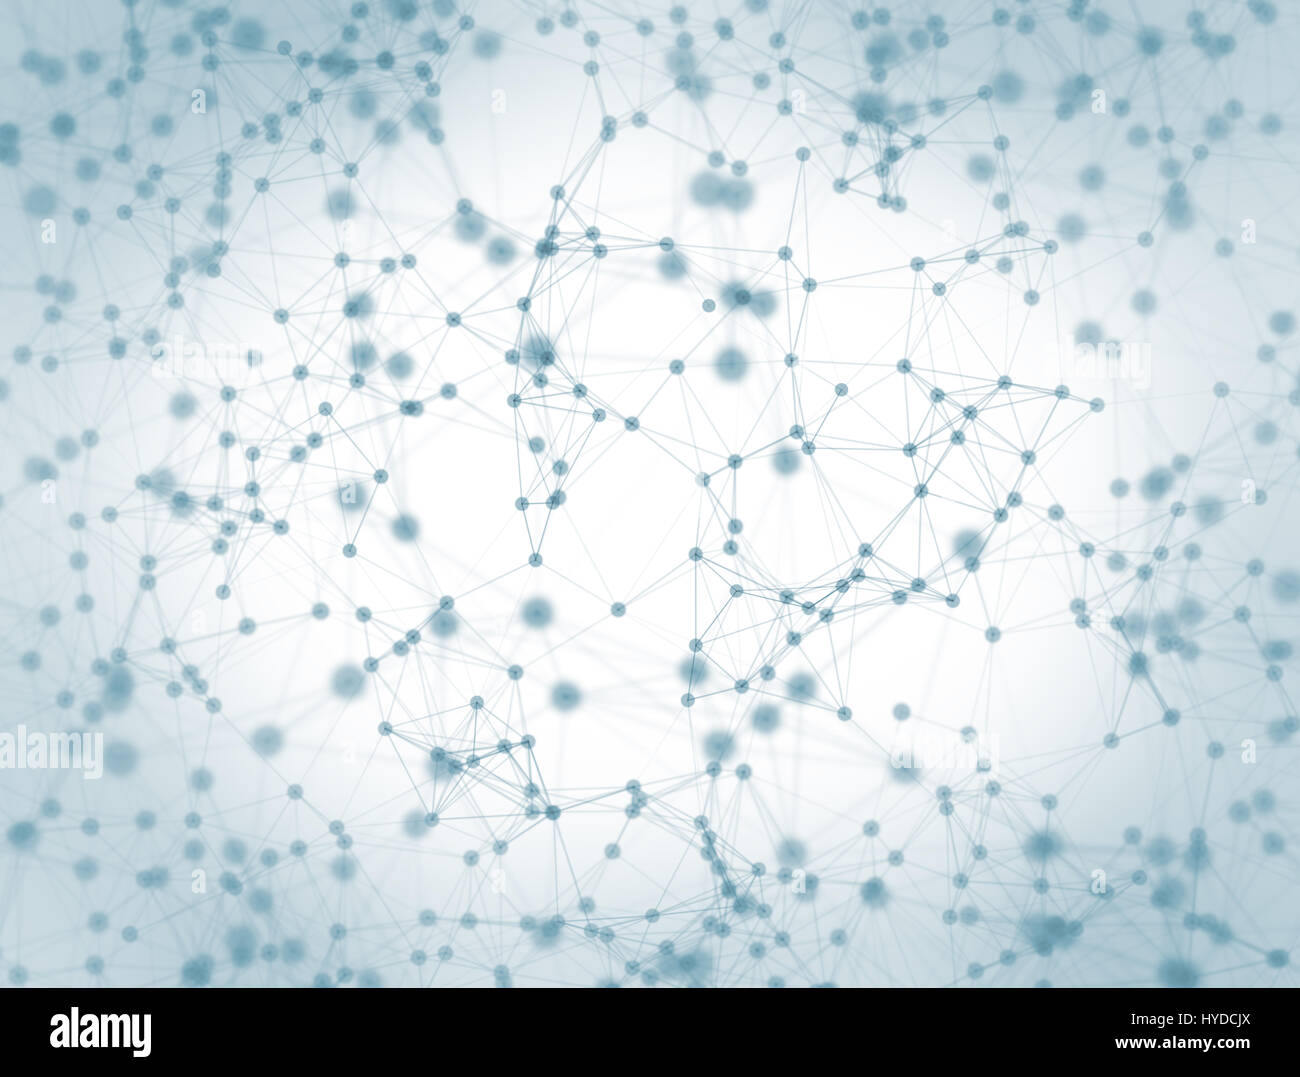 Abstract network background Stock Photo